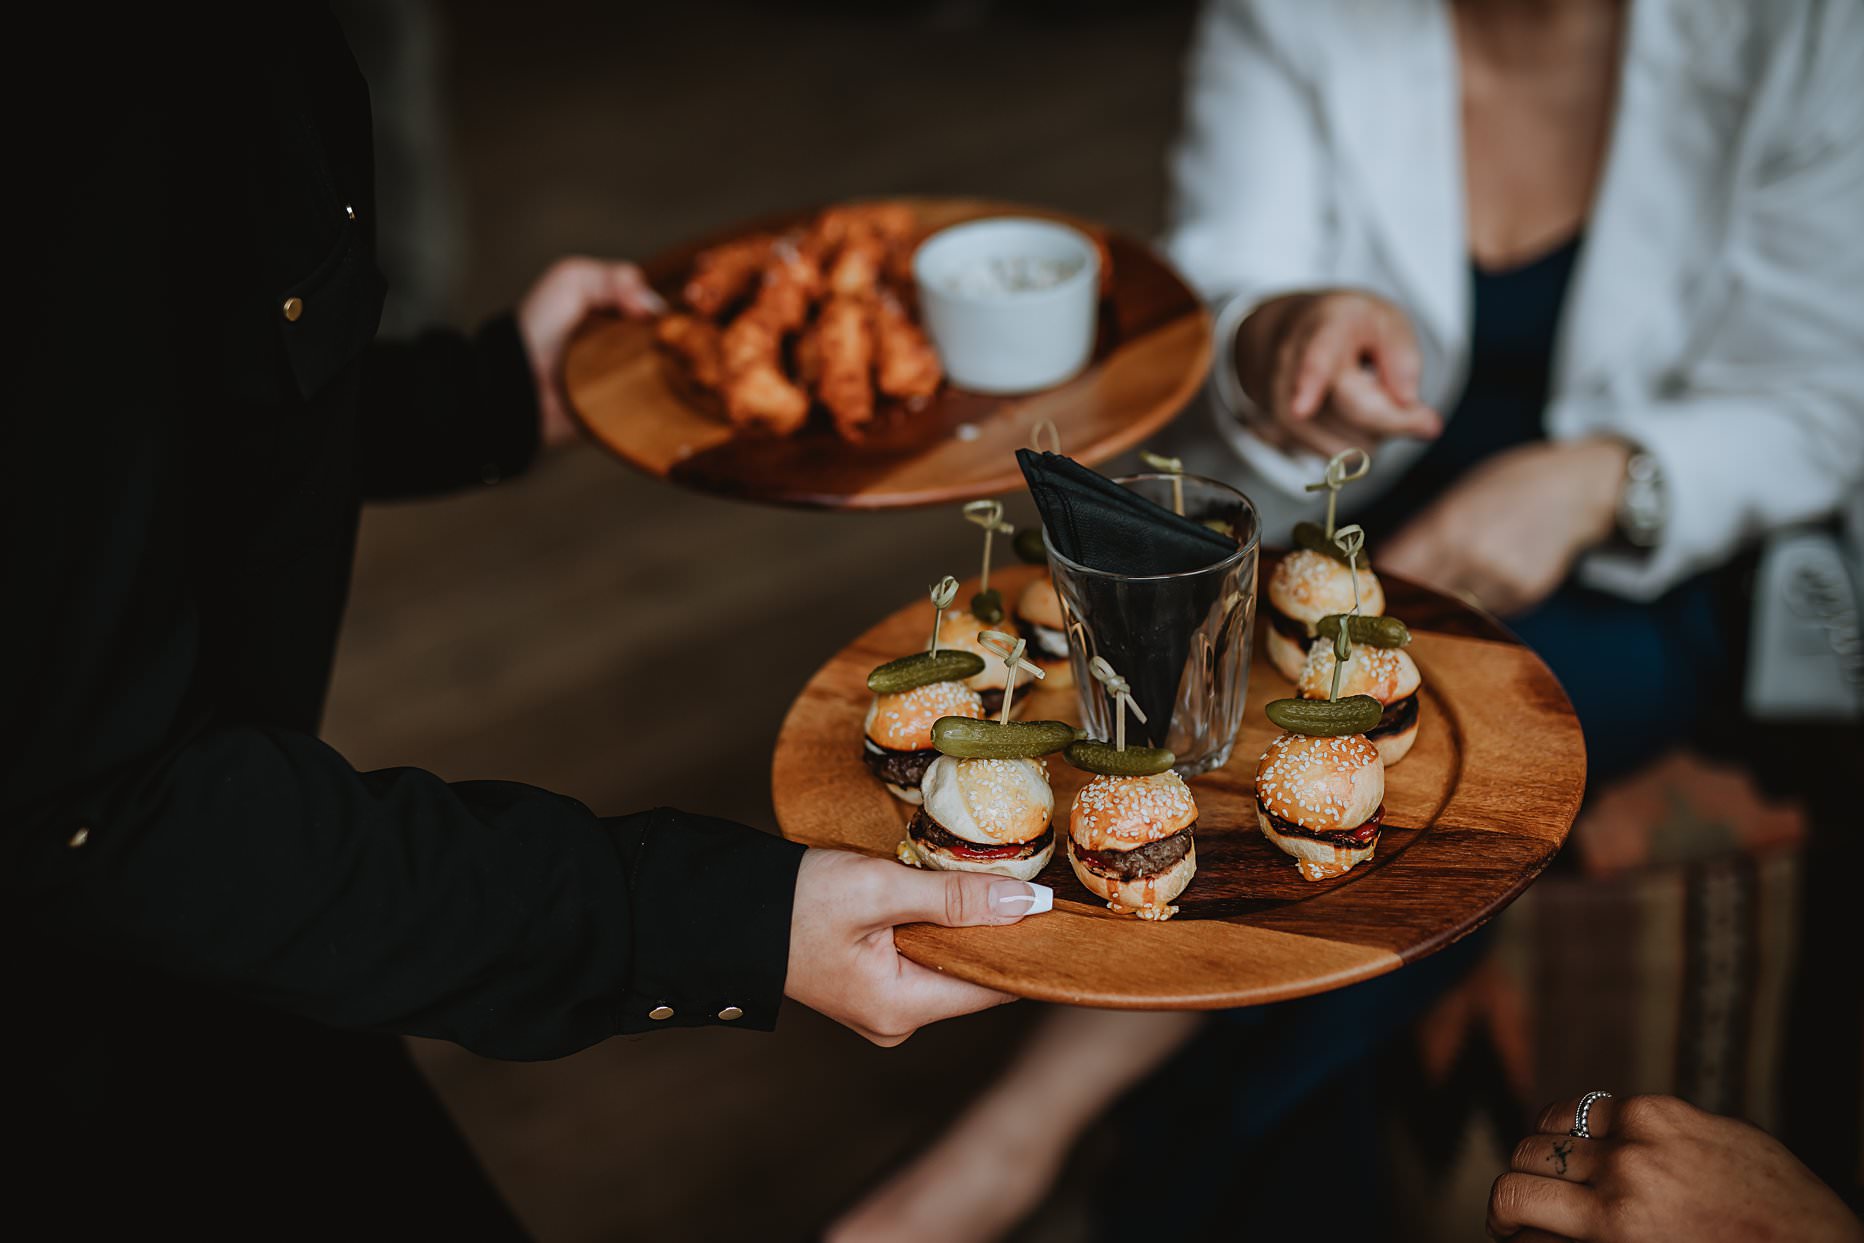 Waitress handing out wedding canapés to guests. The canapés are mini hamburgers with pickles and are presented on a wooden board.